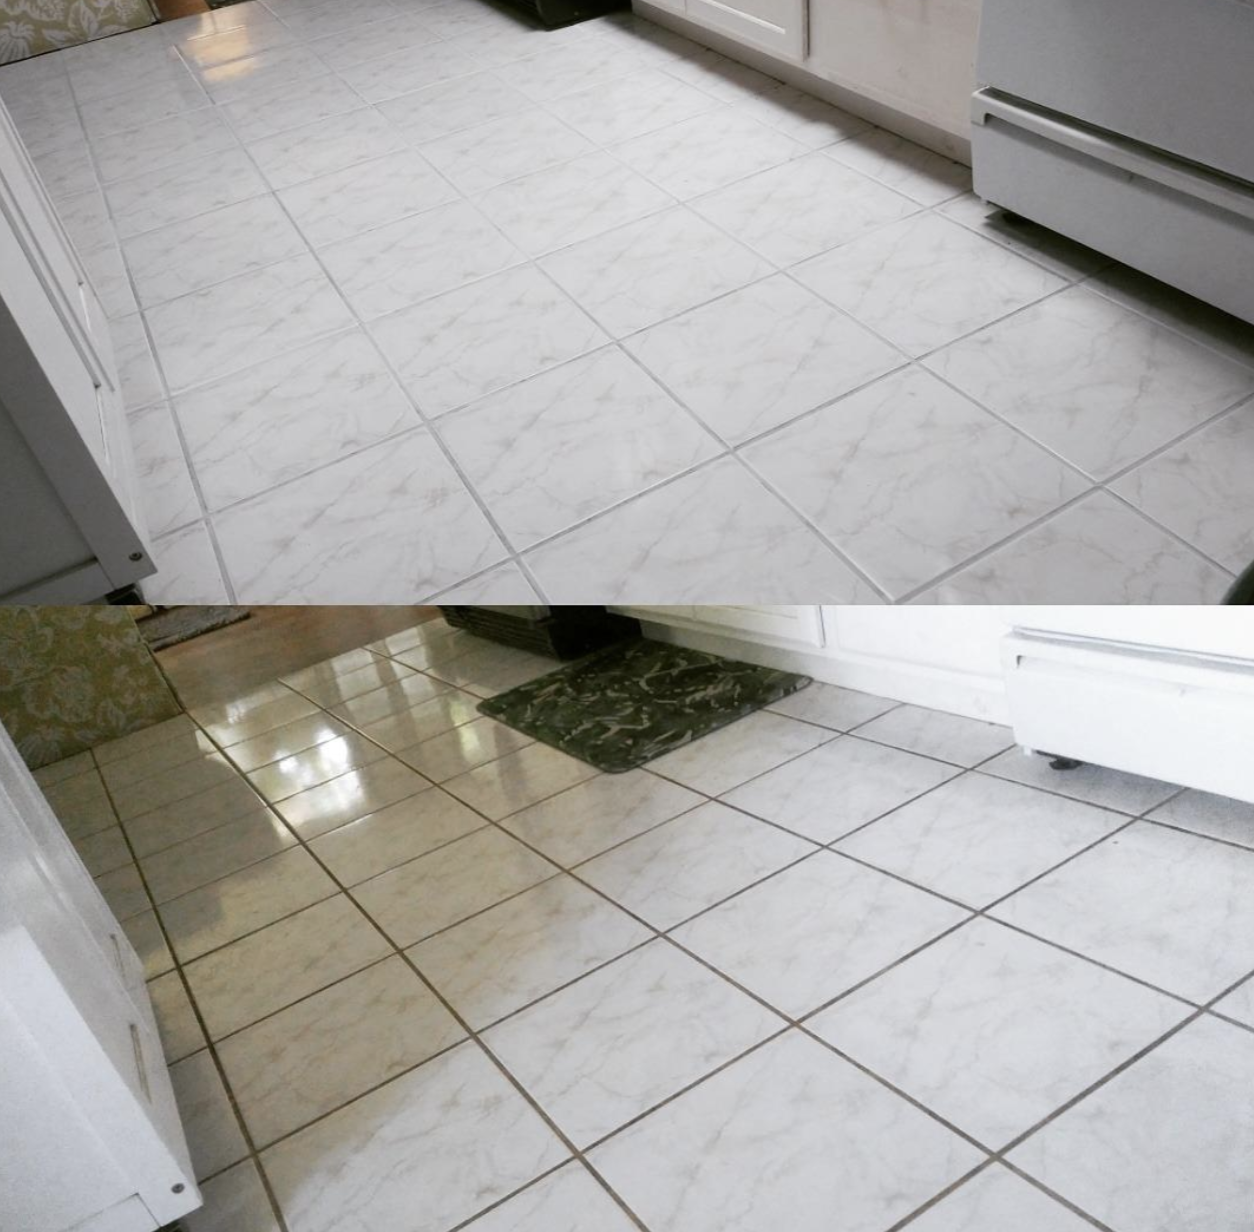 the bottom photo showing a reviewer&#x27;s tiles looking dirty from grout and the top photo, the tiles clear of the grout after using the pen